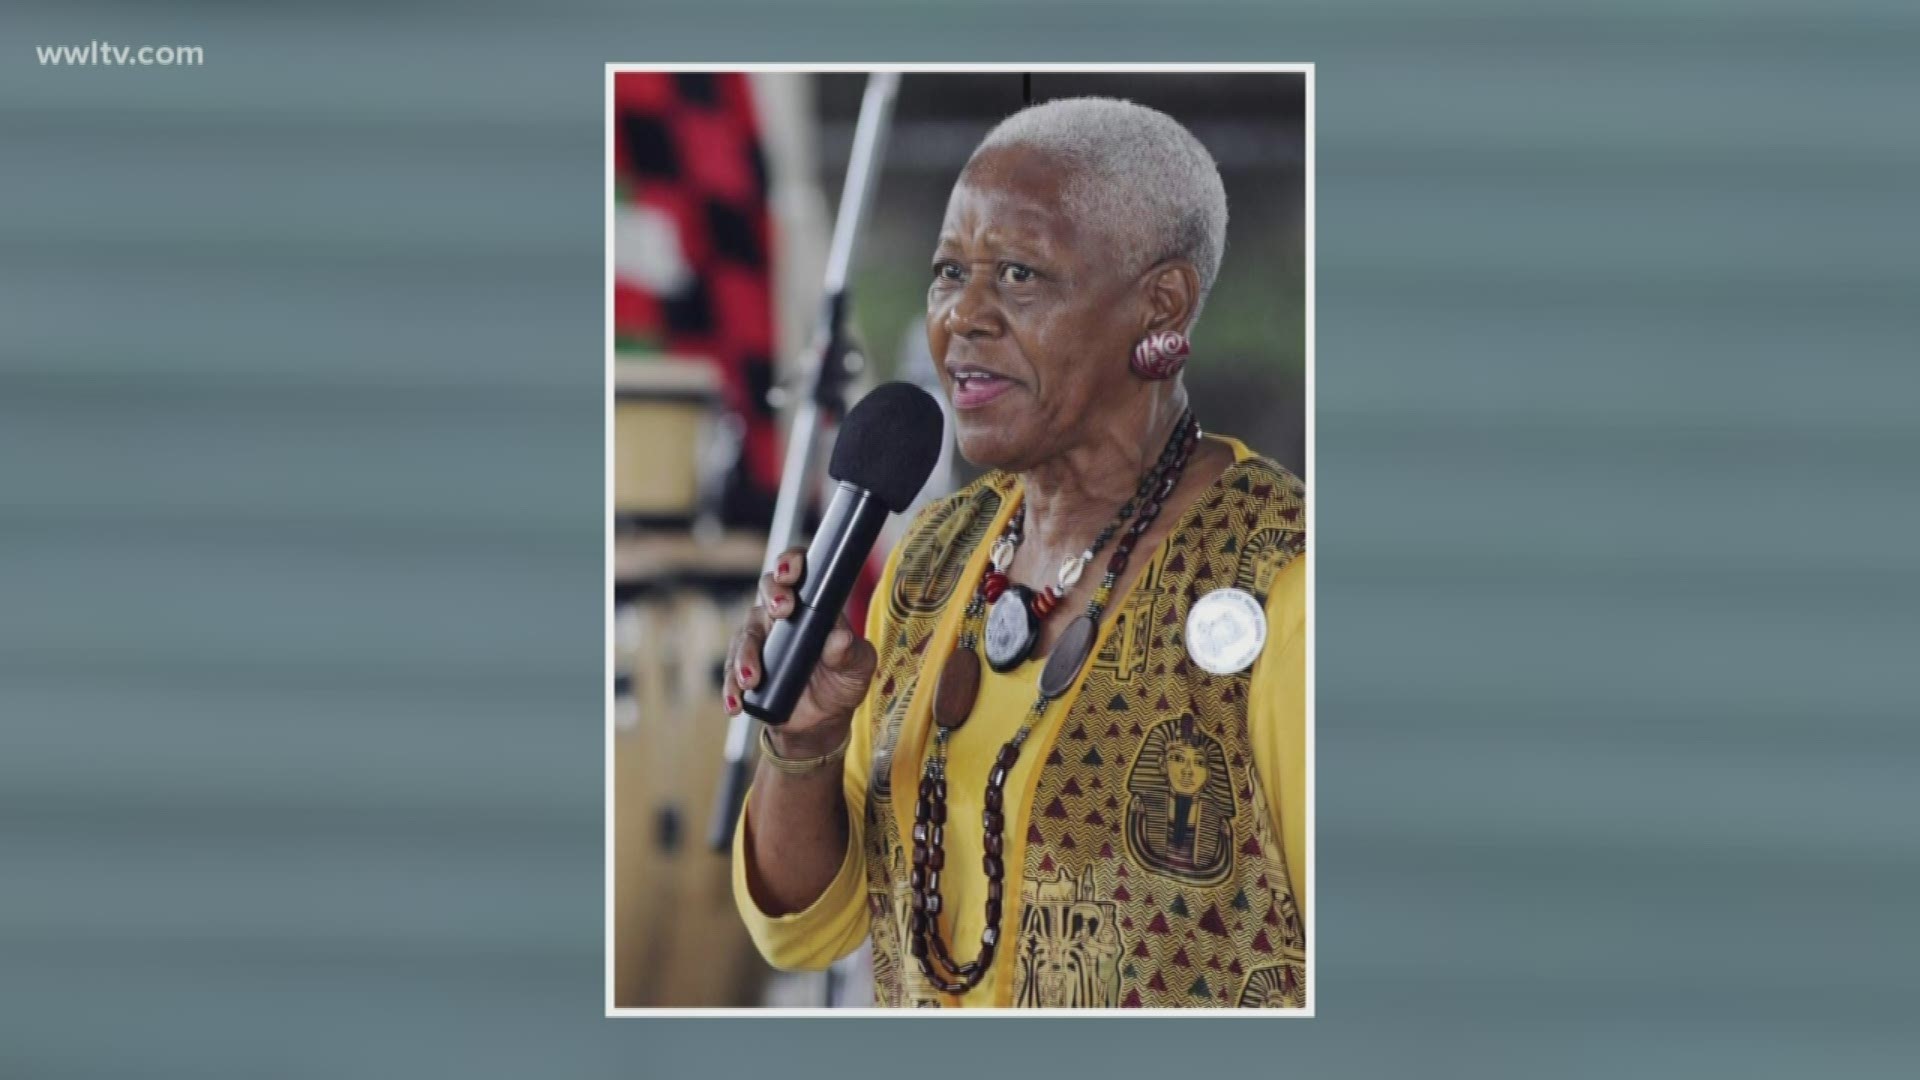 For those who knew and loved Sadie Roberts-Joseph, they said nothing meant more to her than spreading the message of history and culture. Now, they're calling on the same community to step up and speak out about her death.